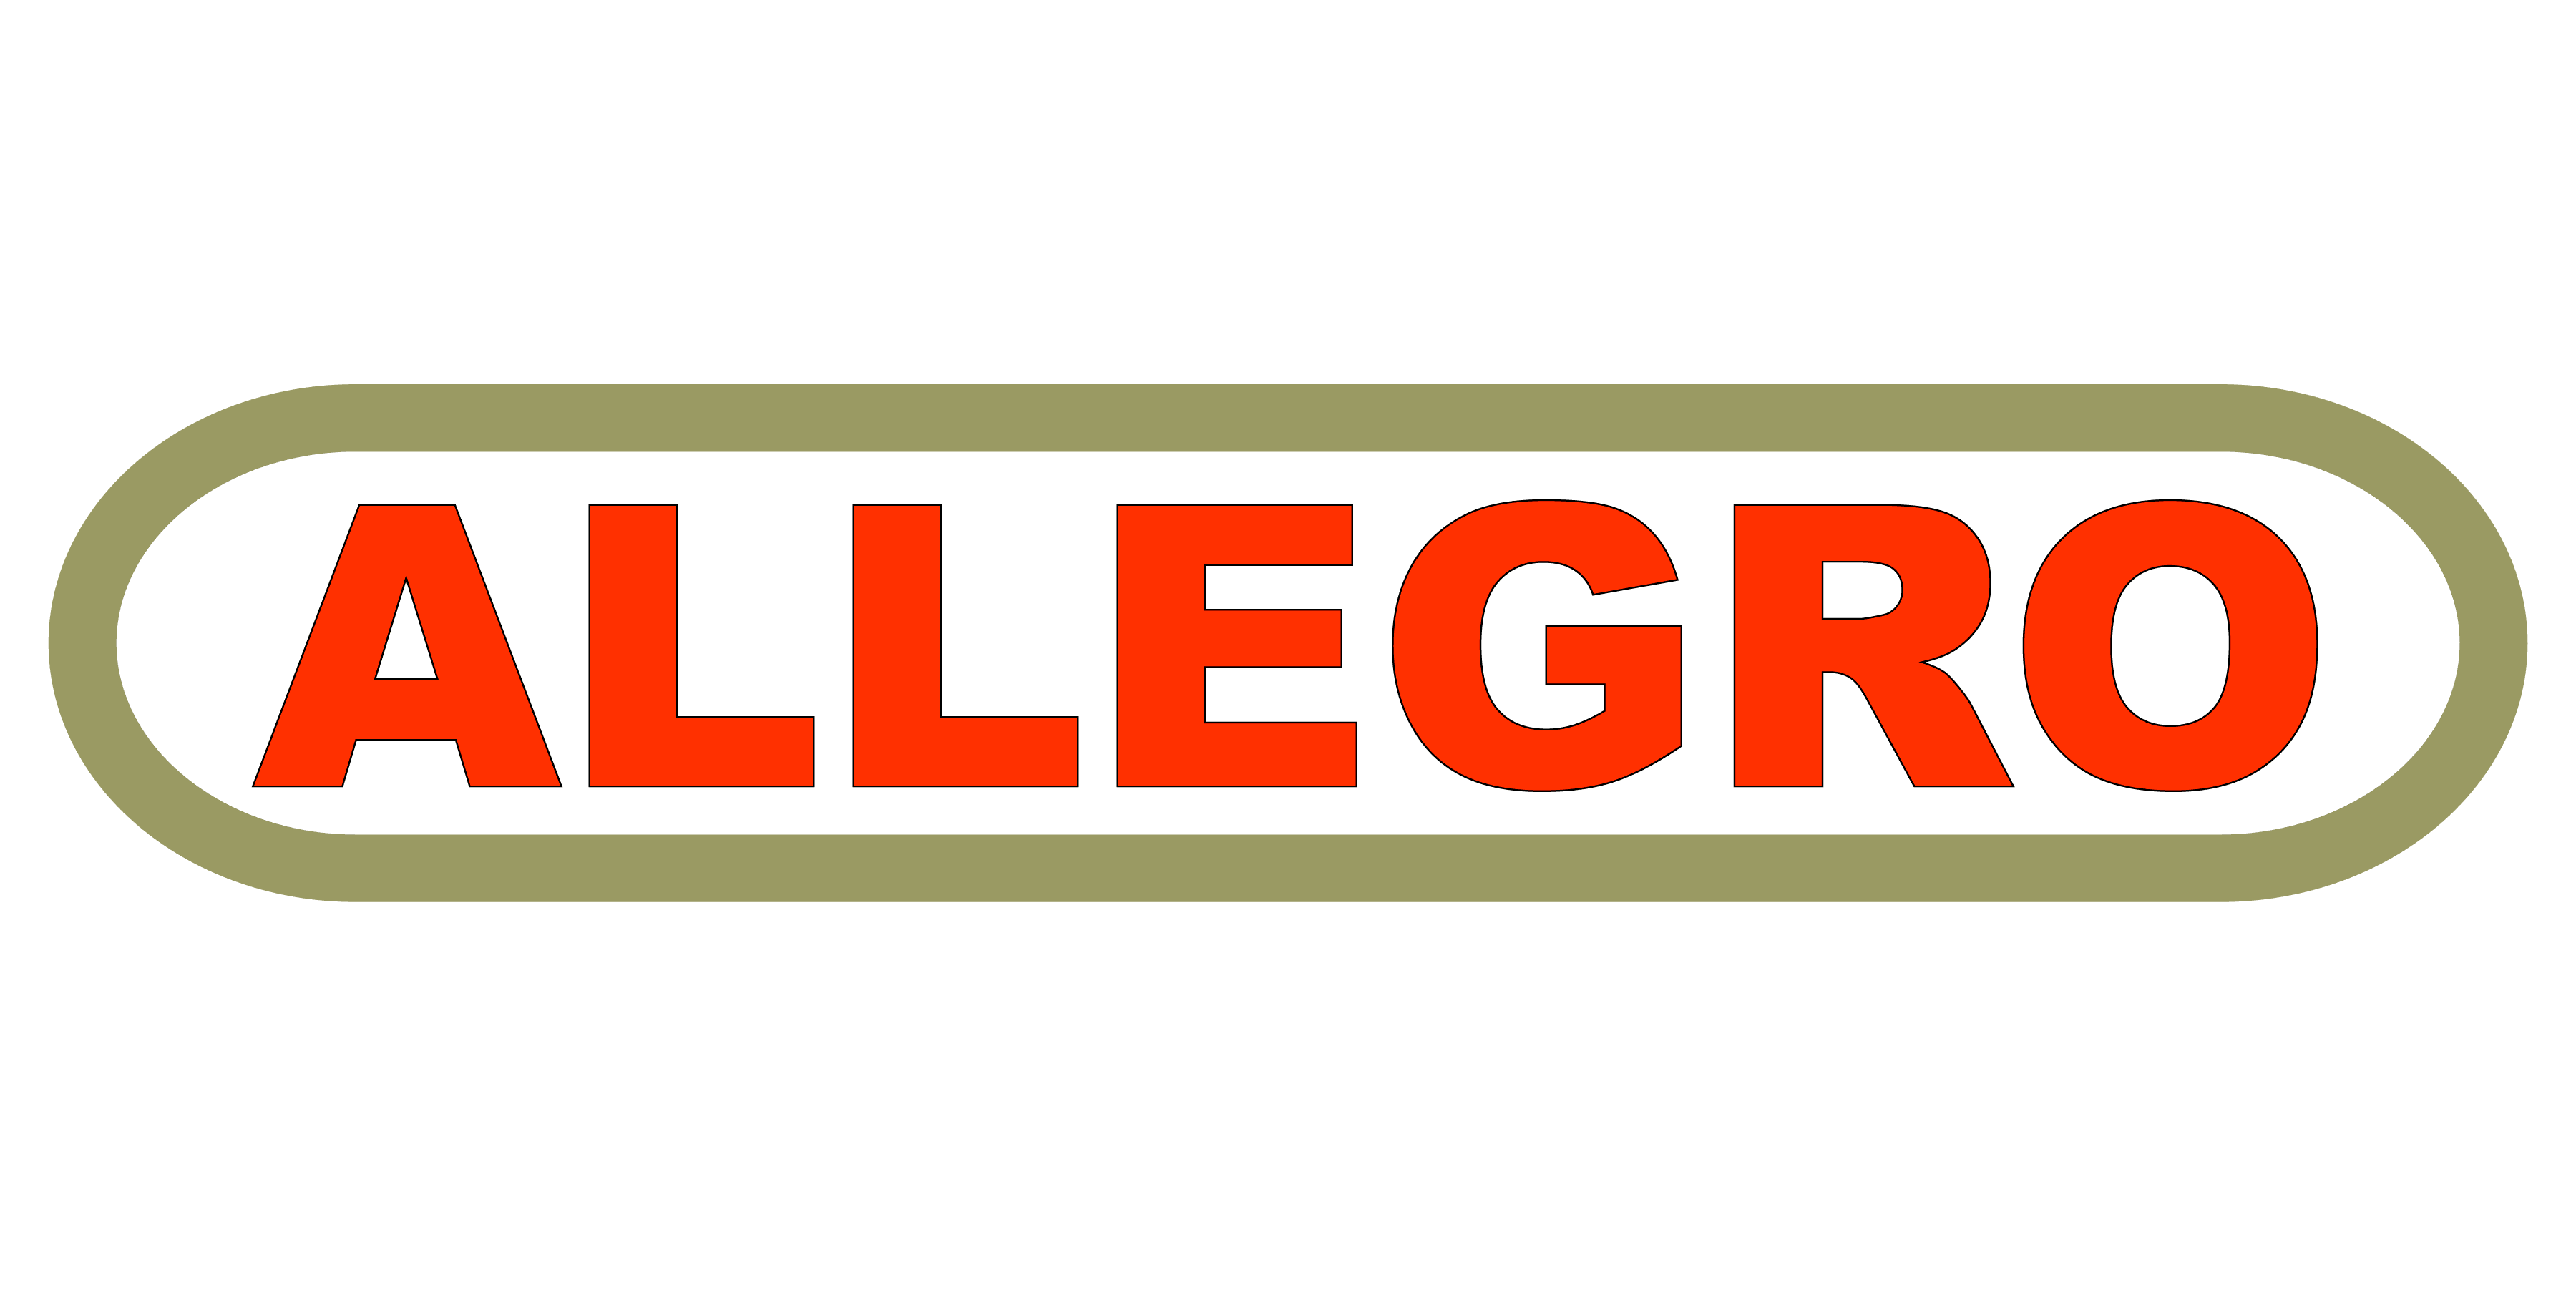 Allegro Logo - Allegro motorcycle logo history and Meaning, bike emblem